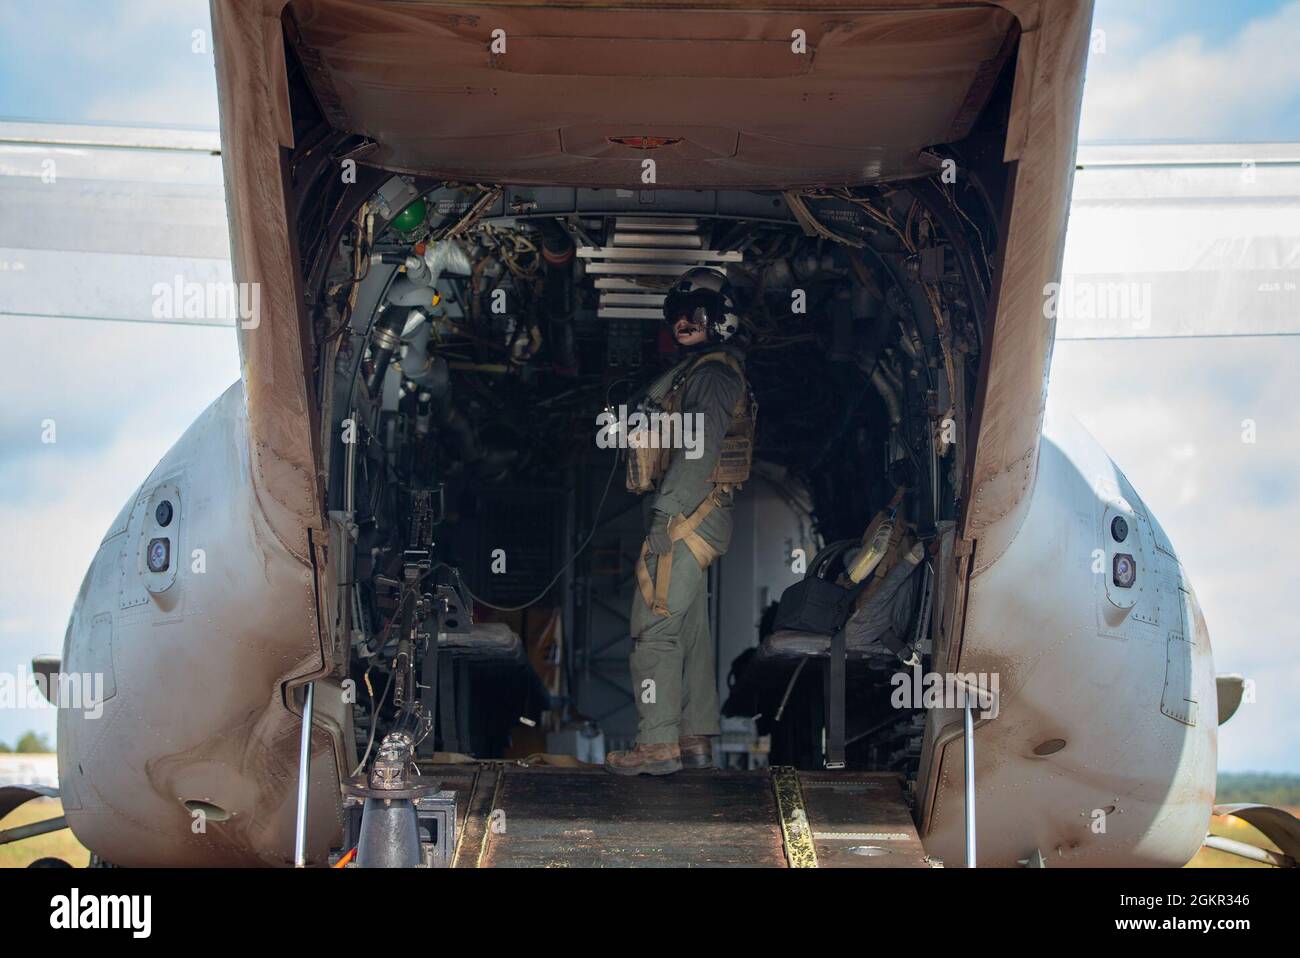 A U.S. Marine with Marine Medium Tiltrotor Squadron 363 (Reinforced) with Marine Rotational Force - Darwin, stands in an MV-22B Osprey after landing at Gove Airport in Nhulunbuy, NT, Australia, June 17, 2021. Marines redeployed from Nhulunbuy to Darwin on MV-22B Ospreys after the successful completion of Exercise Darrandarra. Darrandarra, meaning “together,” demonstrates the Marines Corps’ ability to operate with the Australian Defence Force and reinforce embassies and conduct noncombatant evacuation operations in response to crises and contingencies in the Indo-Pacific region. Stock Photo